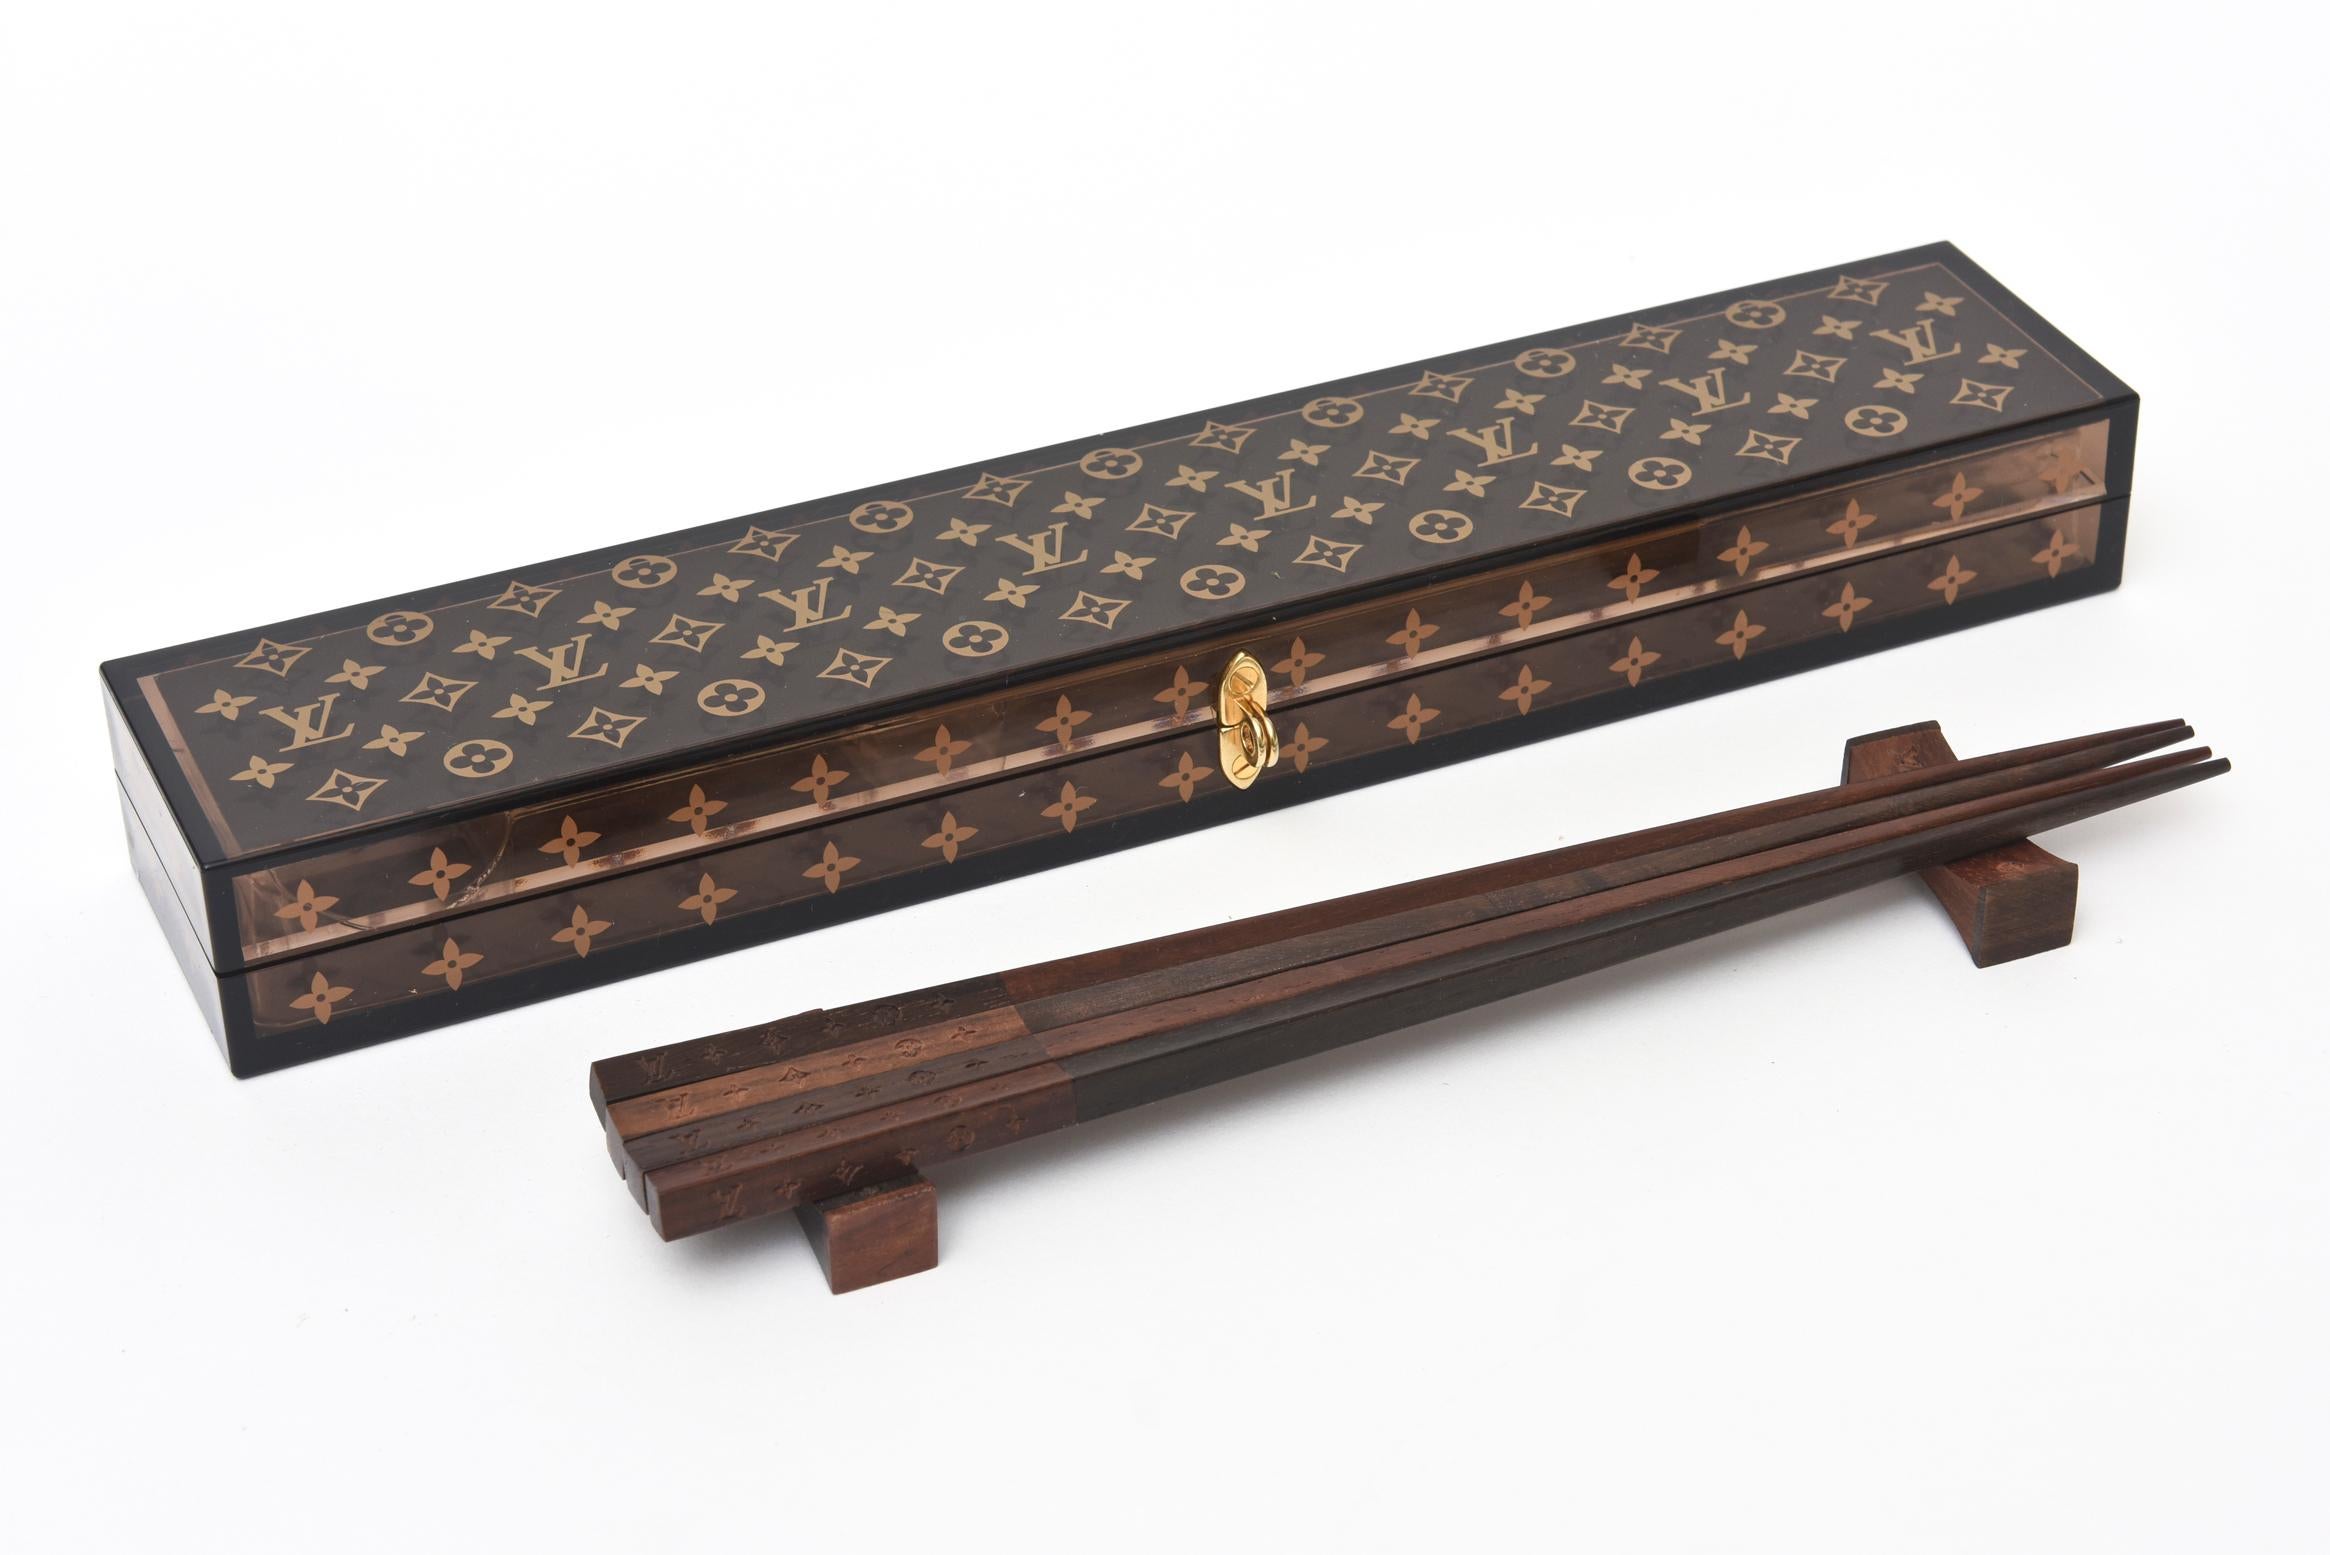 This very special set of Louis Vuitton rosewood chopstick set was a limited edition between 2009-2012 It has since been discontinued. It consists of a printed monogrammed dark brown amber LV lucite box with a leather tie and a pair of chic chinese